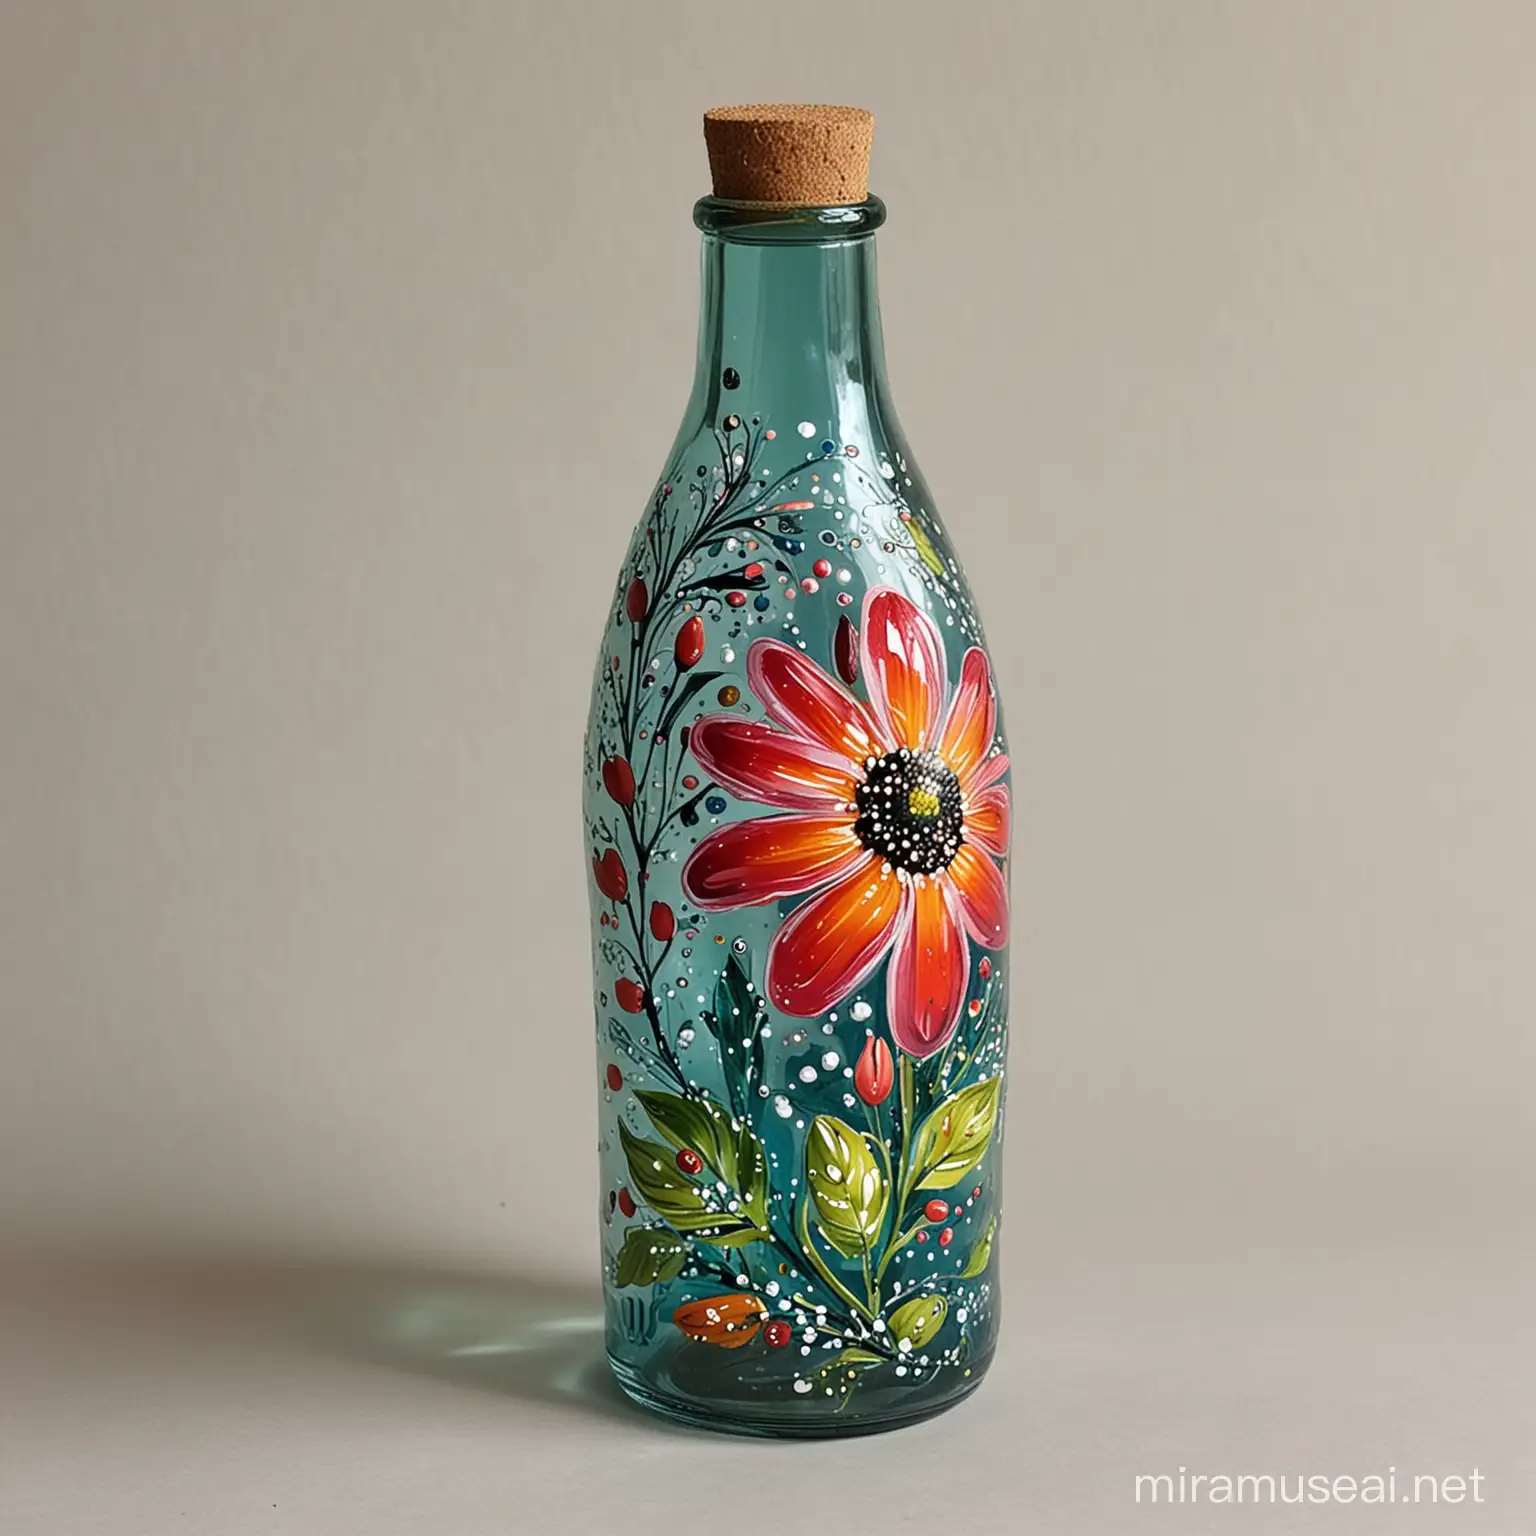 Glass bottle painted with acrylic paints